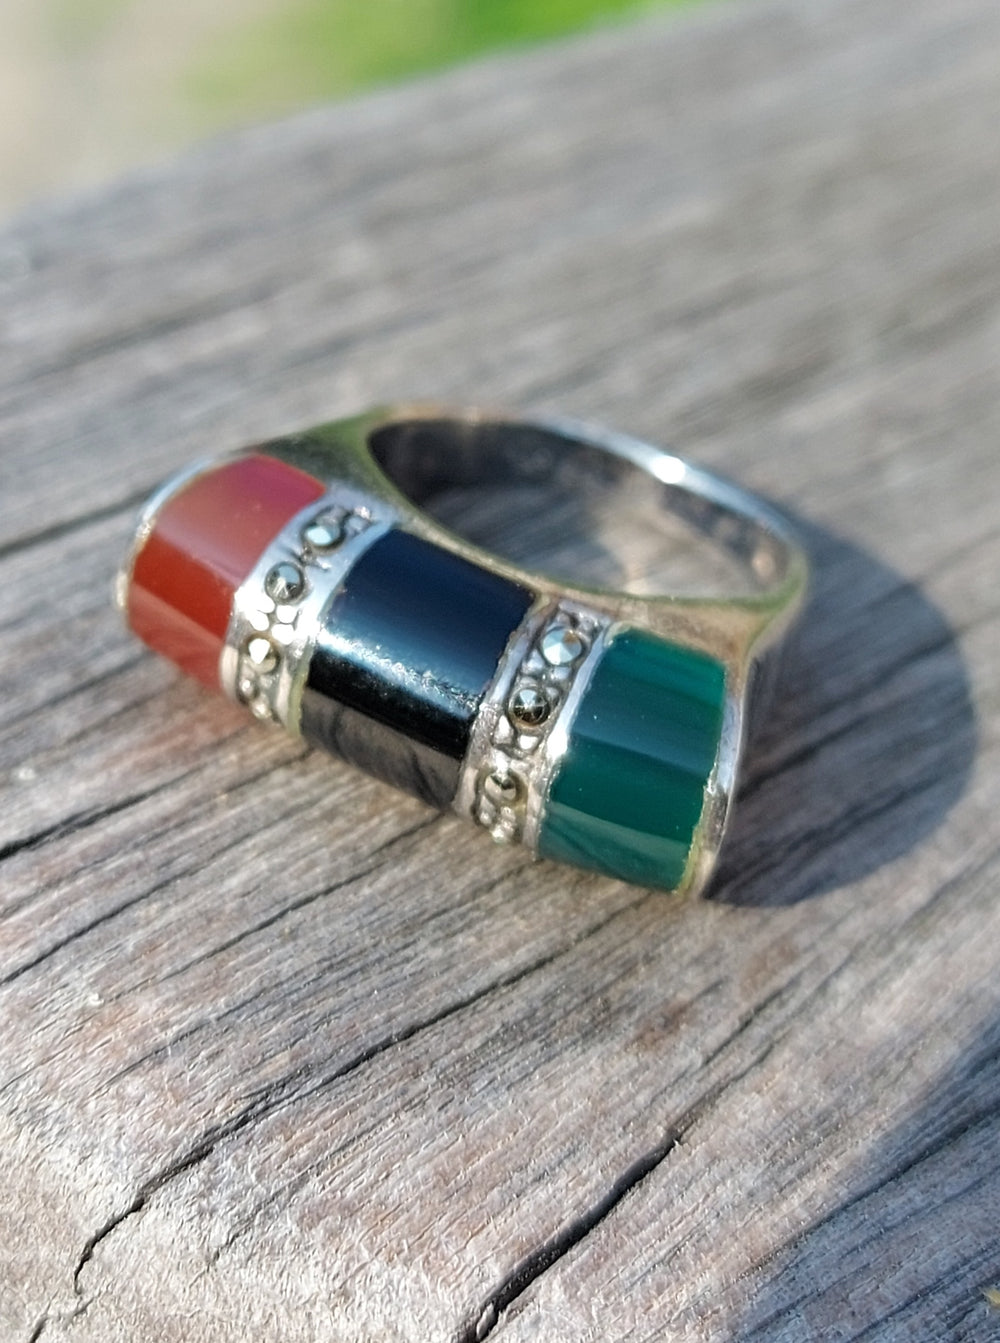 Onyx, Carnelian and Green Agate Ring / Silver Marcasite Ring / Silver Statement Ring